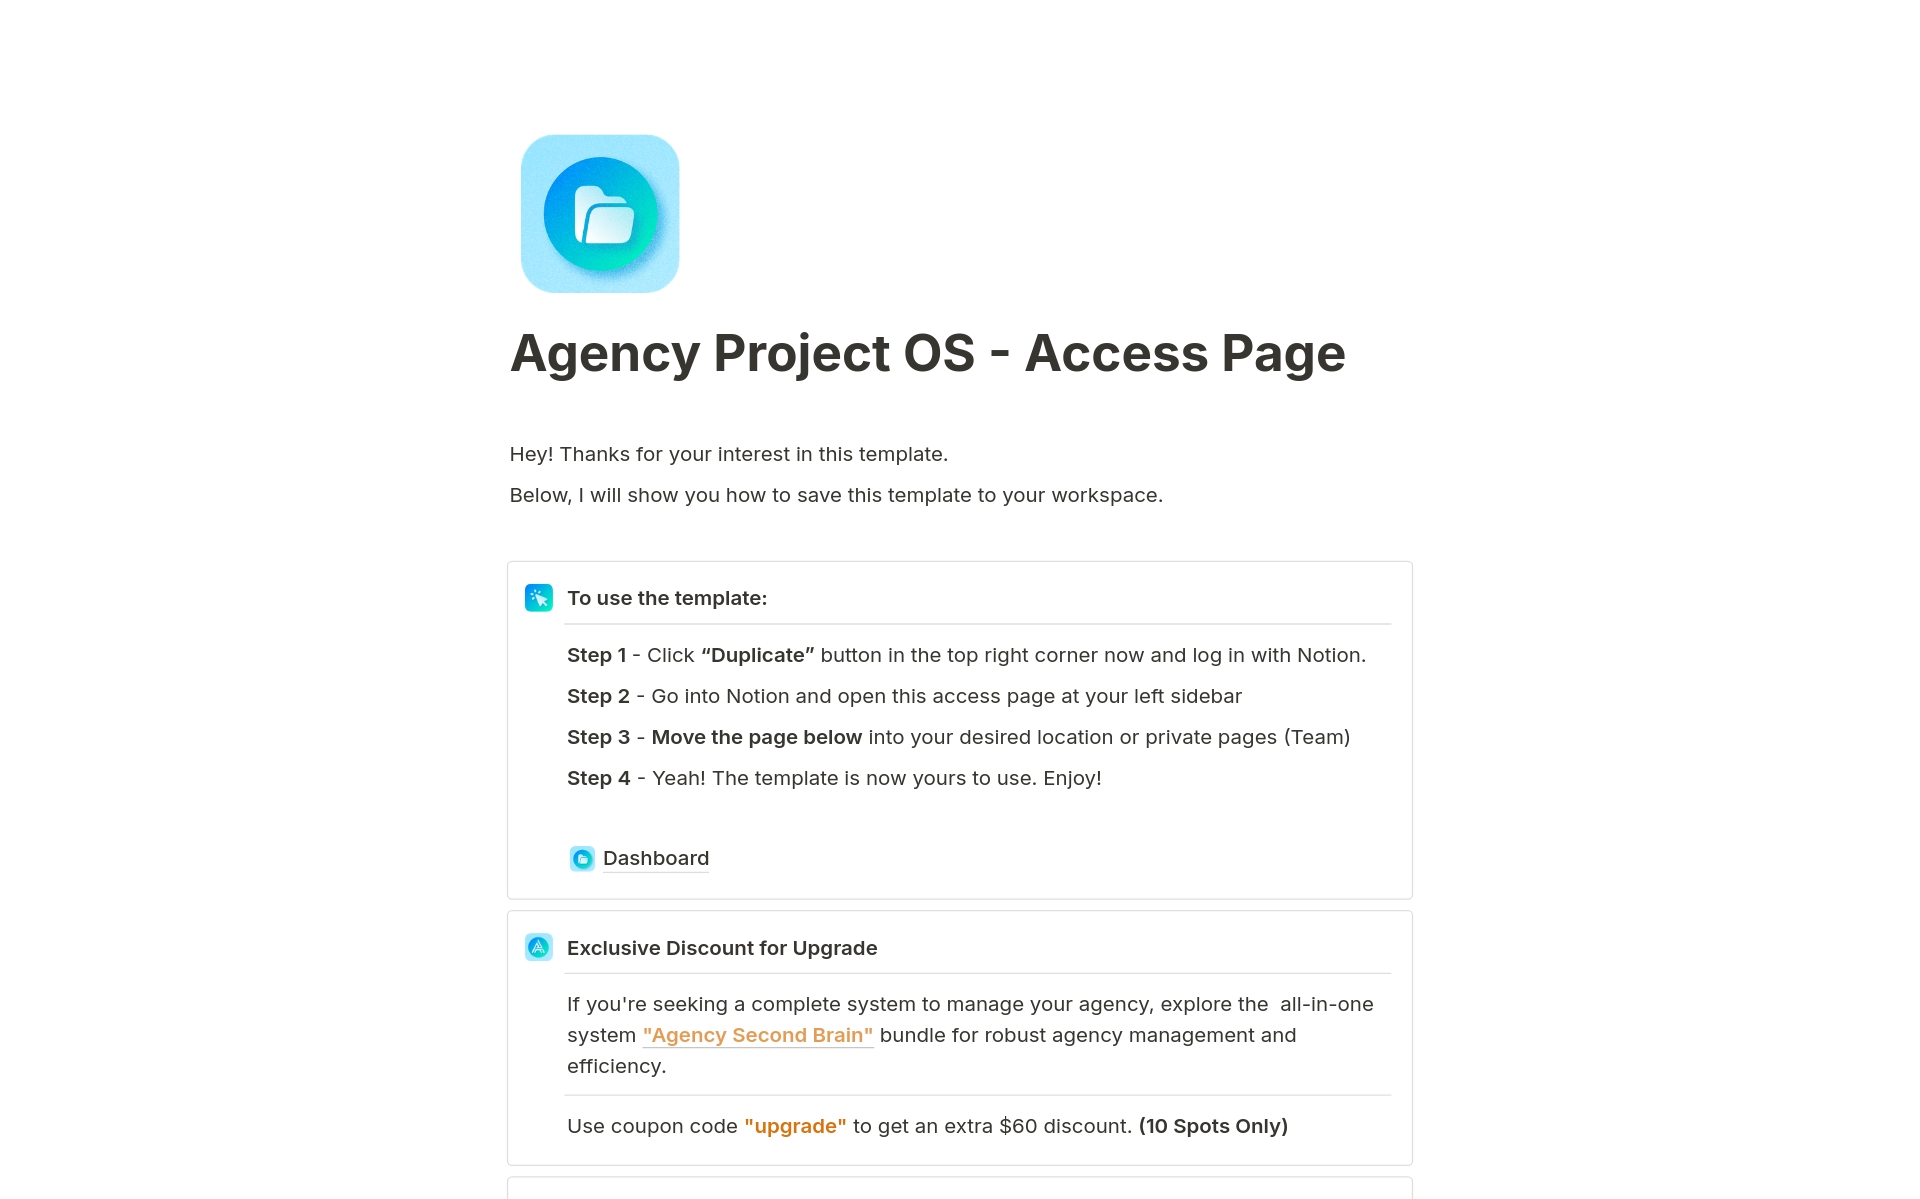 Streamline your team's workflow for peak efficiency and flawless project execution with Agency Project OS.